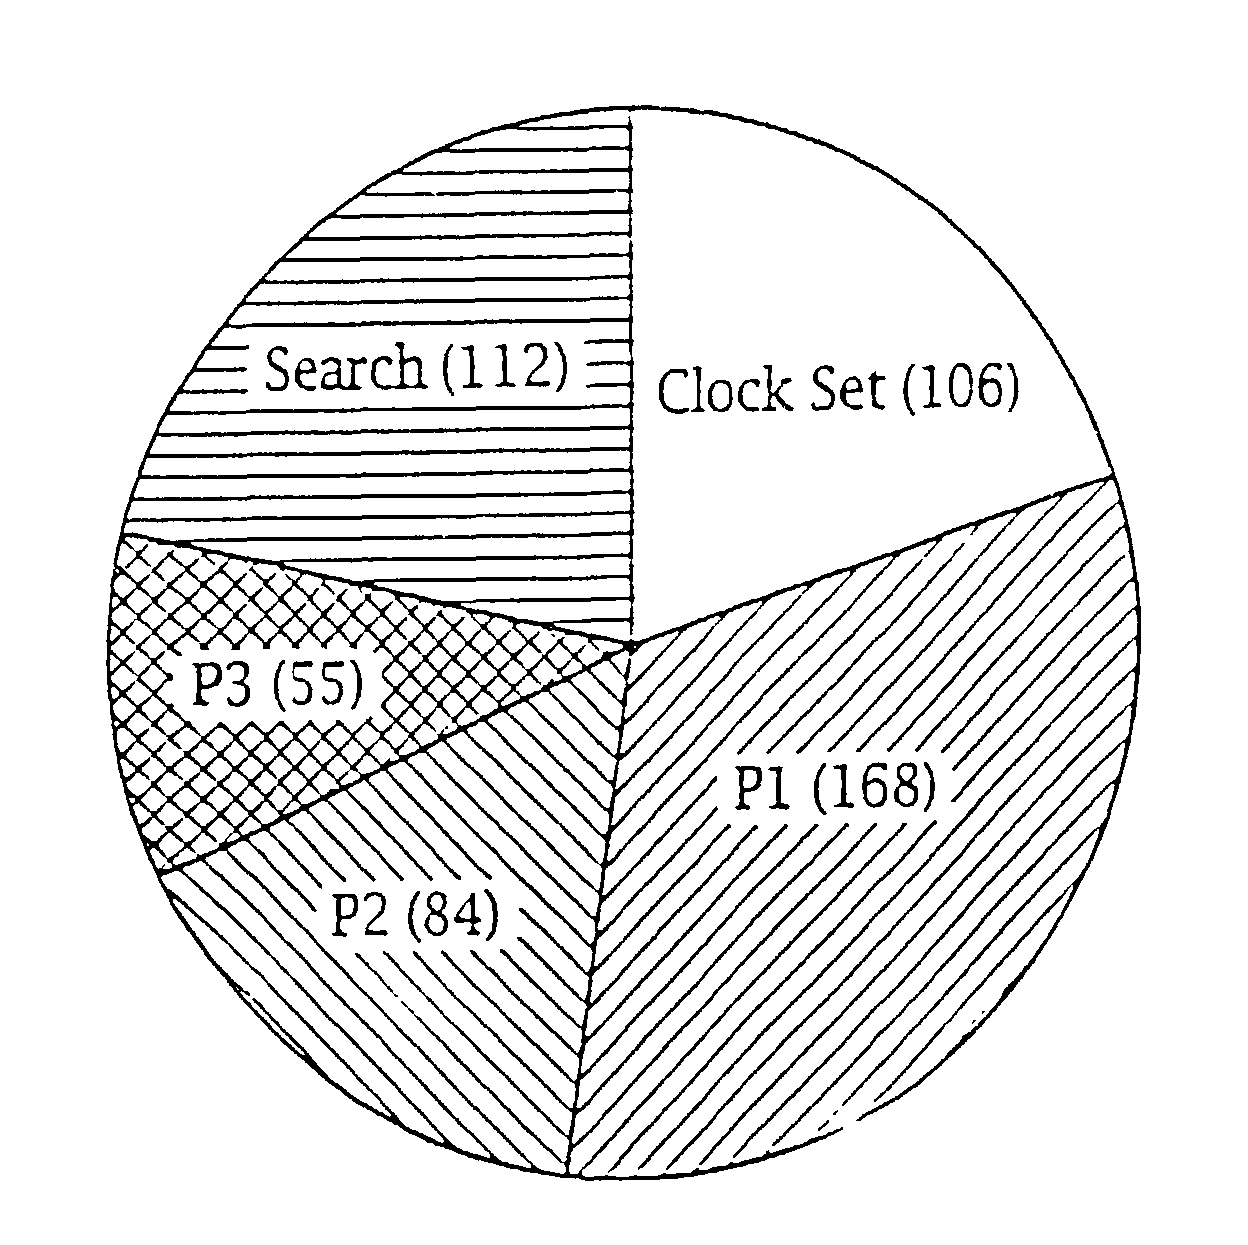 Adaptive pattern recognition based controller apparatus and method and human-factored interface therefore